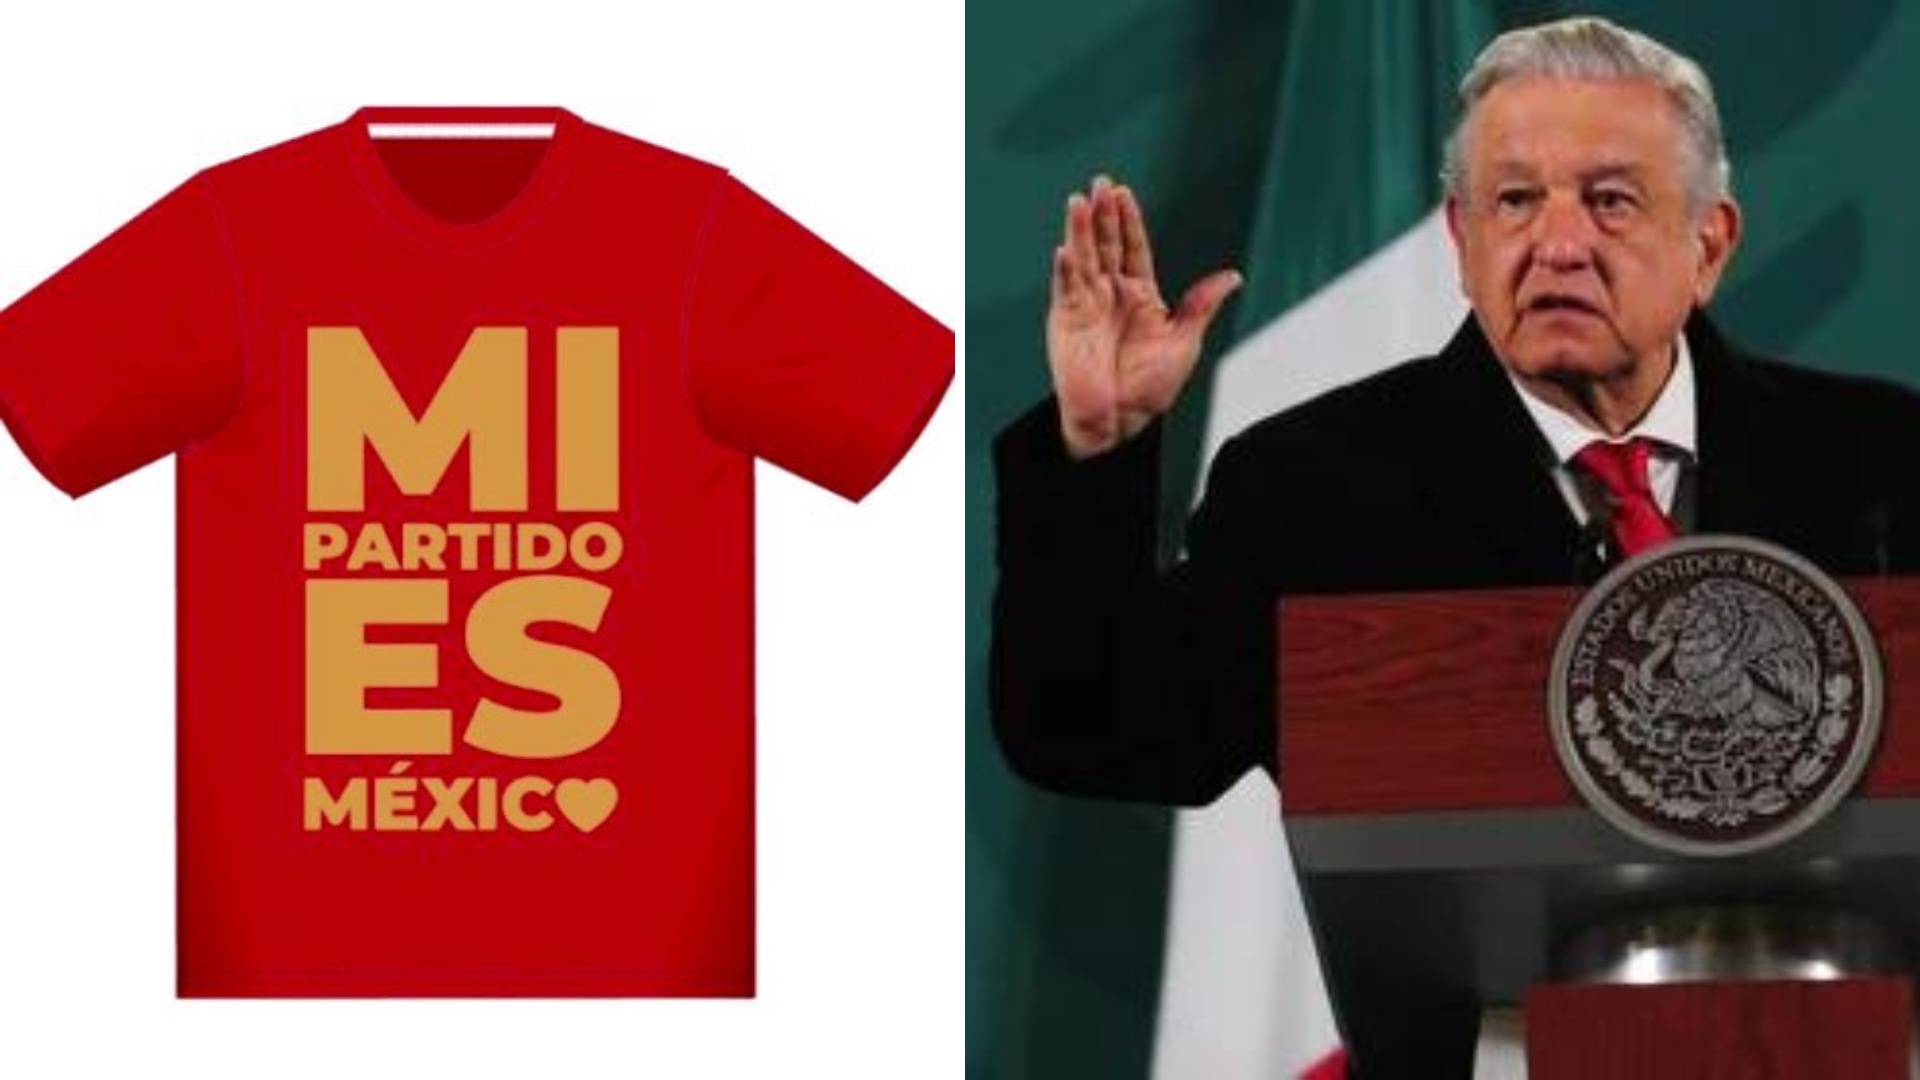 The shirt designed by Edgar Smolensky was published on November 17, shortly after President Andrés Manuel called for the demonstration.  (Photo: Special)